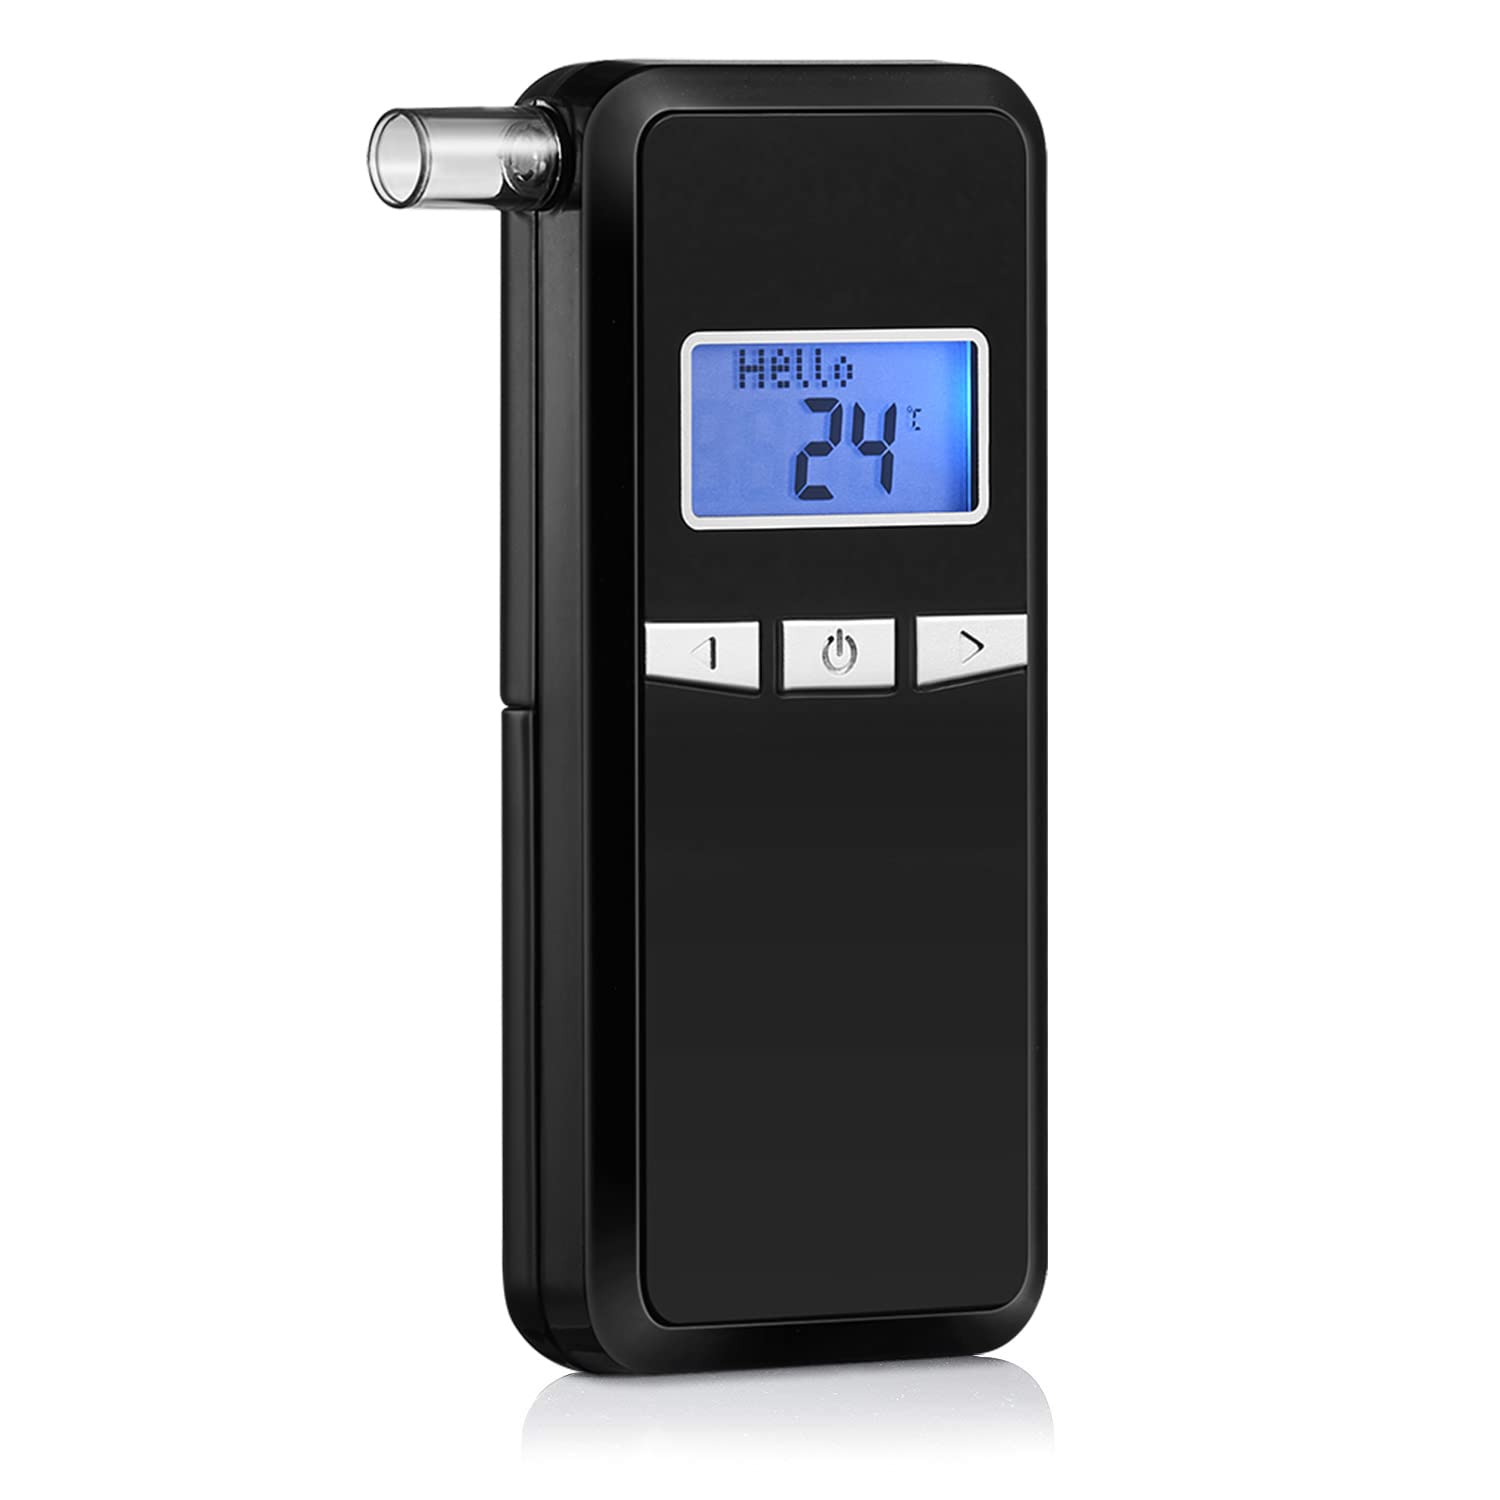 JASTEK Portable Breathalyzer Tester, Professional-Grade Home Breathalyzer  Digital Alcohol Tester with Memory and Warning Function (10 Mouthpieces)